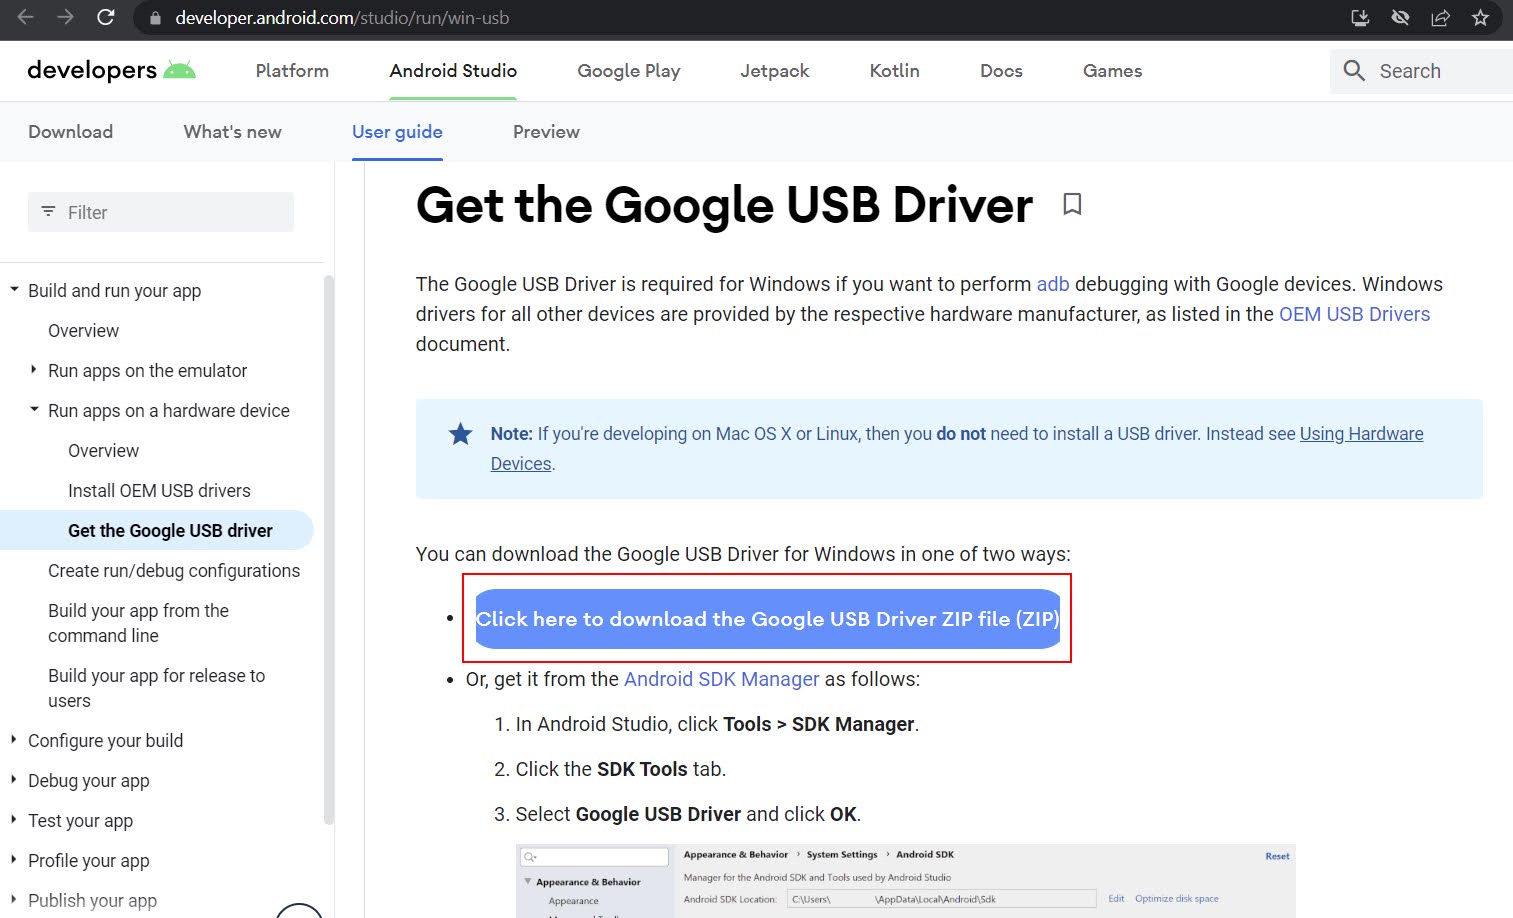 Click to download the Google USB Driver zip file.